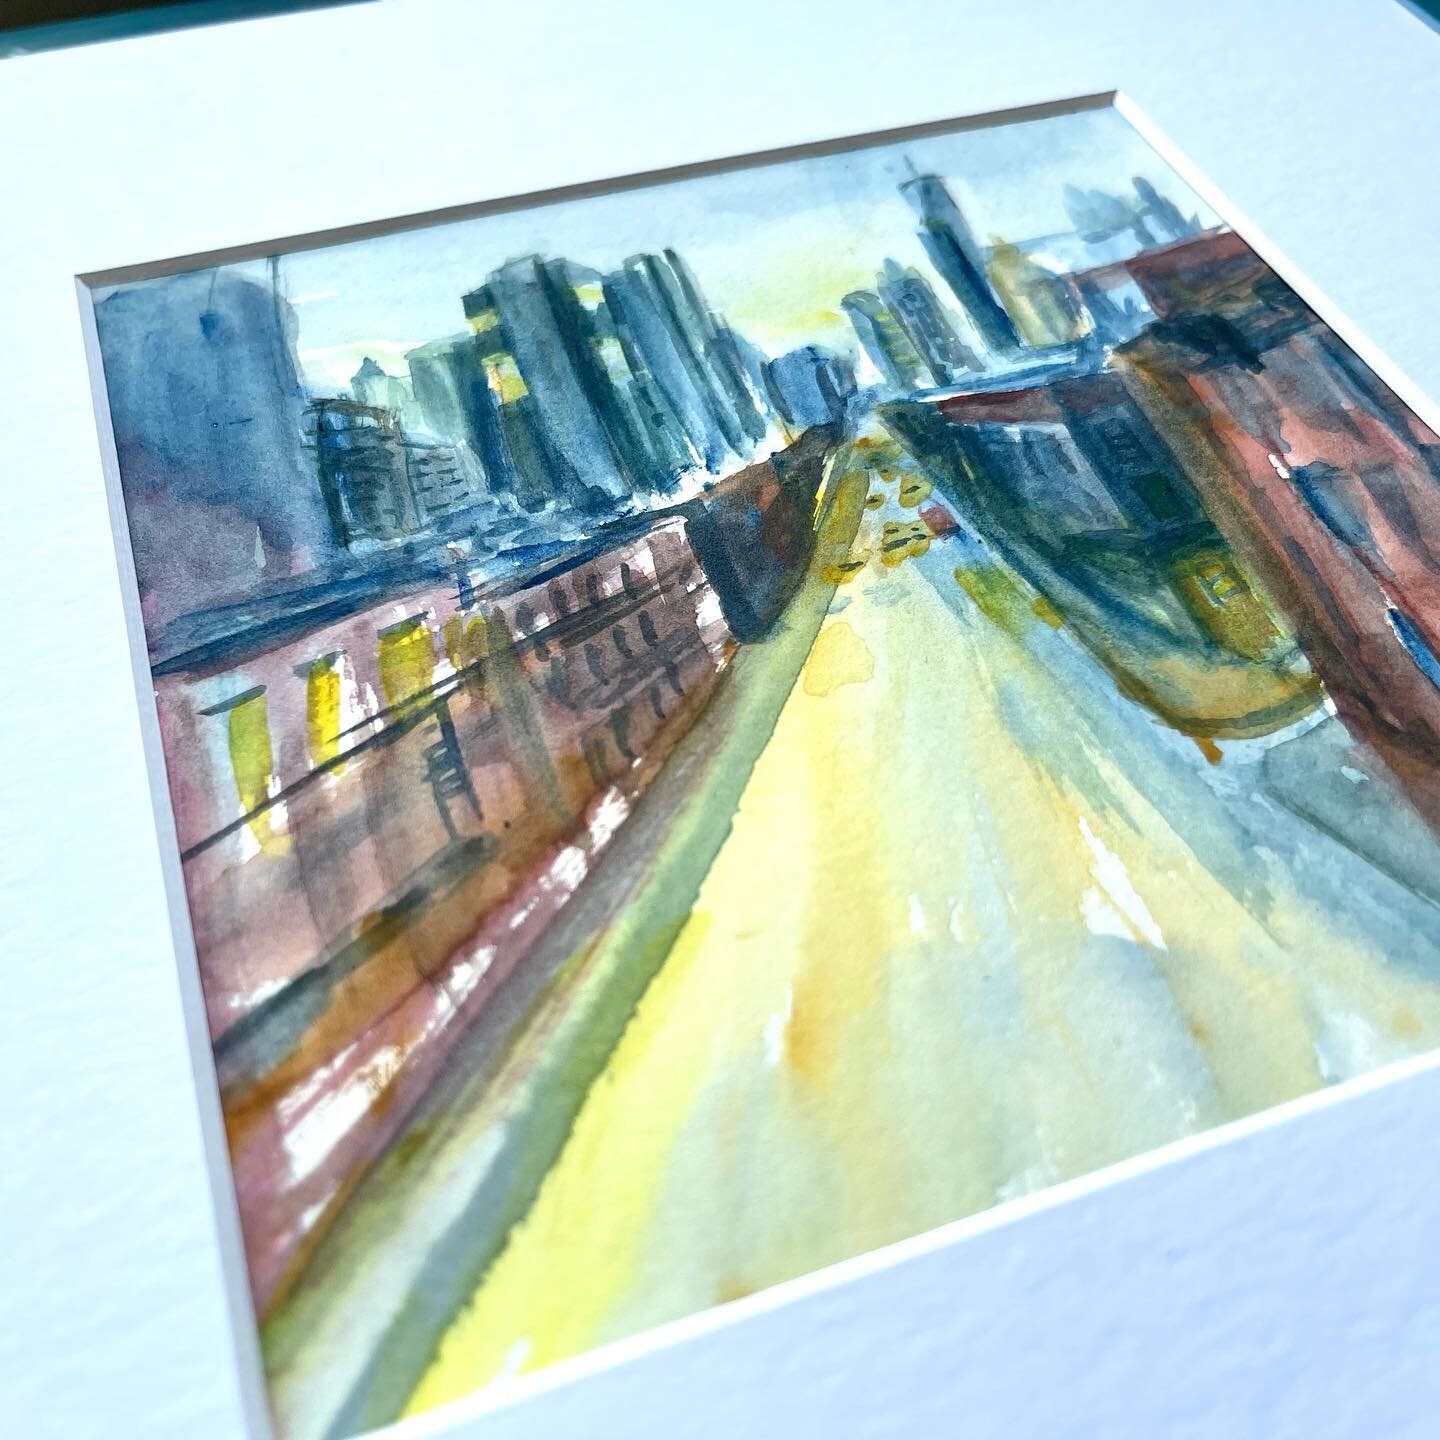 🎨 One of my favorite things about working in the studio is the sound of the train 🚂 speeding by. 
.
I&rsquo;ve been day dreaming of being on that train to NYC and these small watercolor paintings bring me right back. I love the energy and colors in